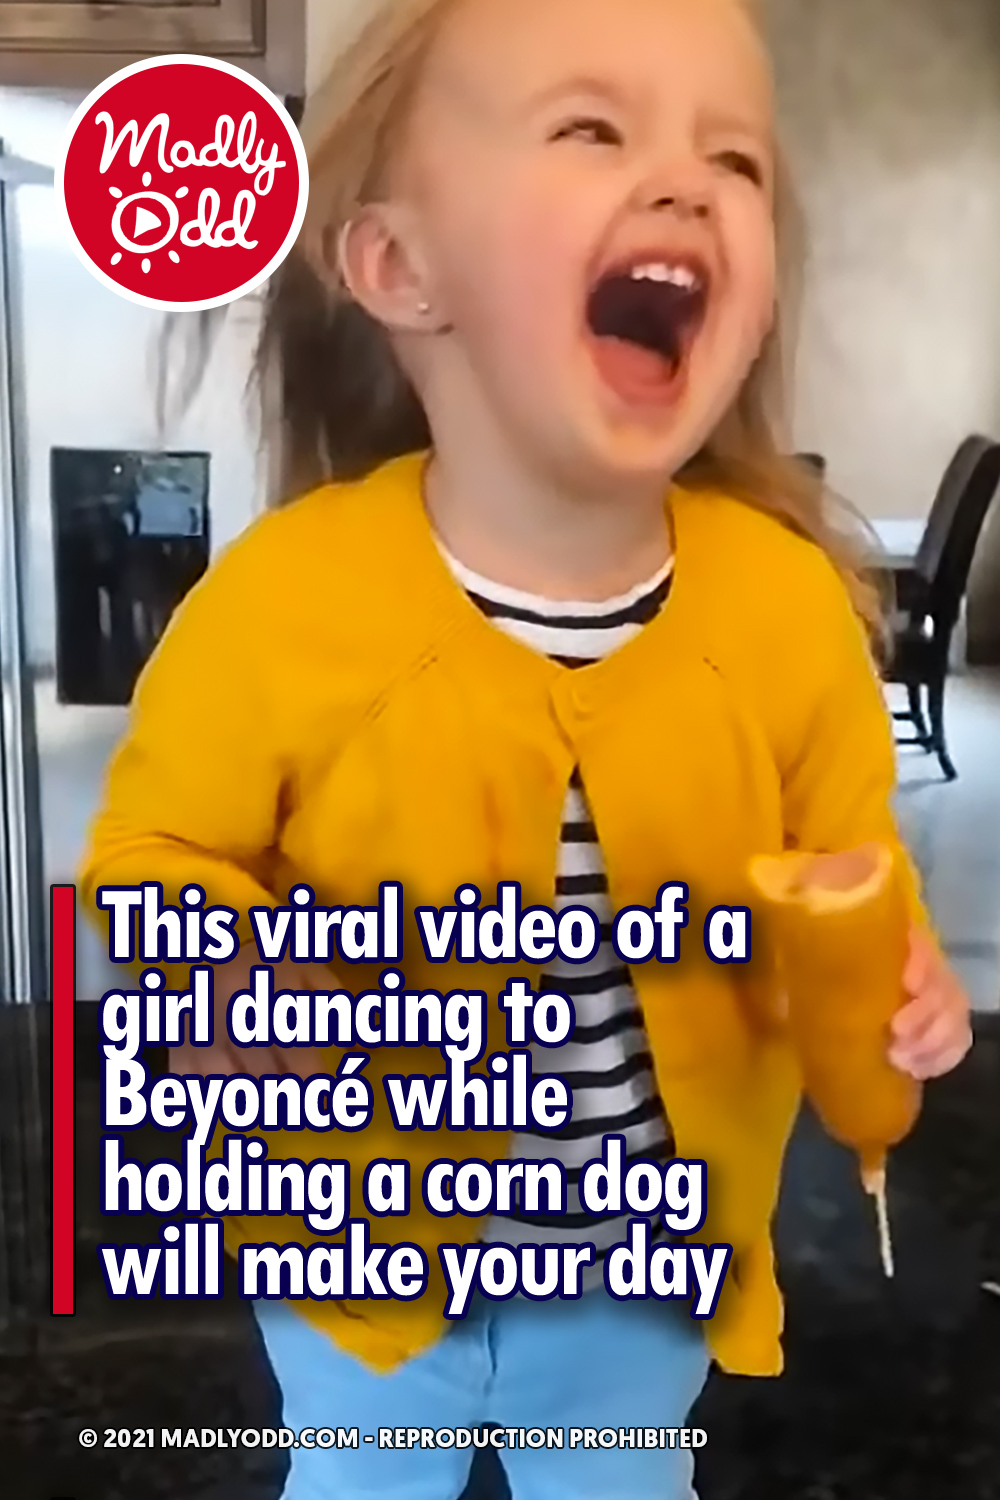 This viral video of a girl dancing to Beyoncé while holding a corn dog will make your day